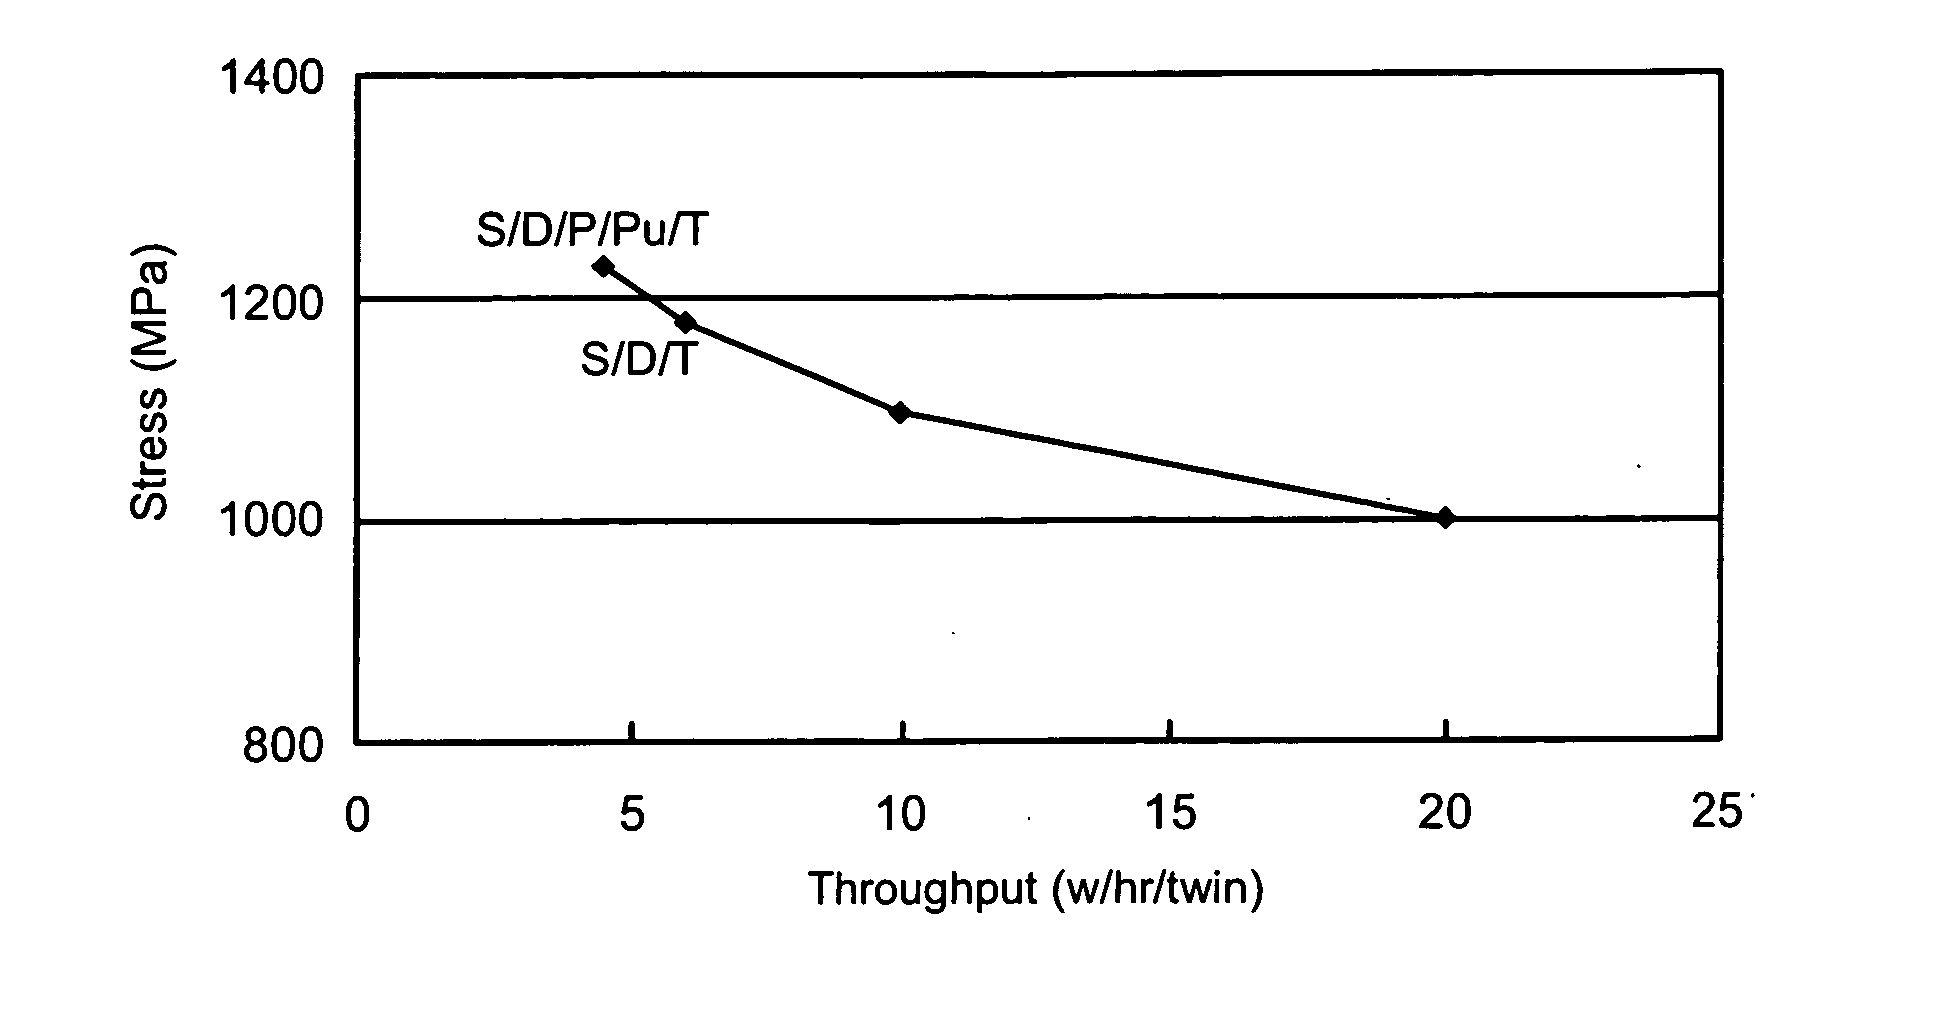 Method to increase tensile stress of silicon nitride films using a post PECVD deposition UV cure